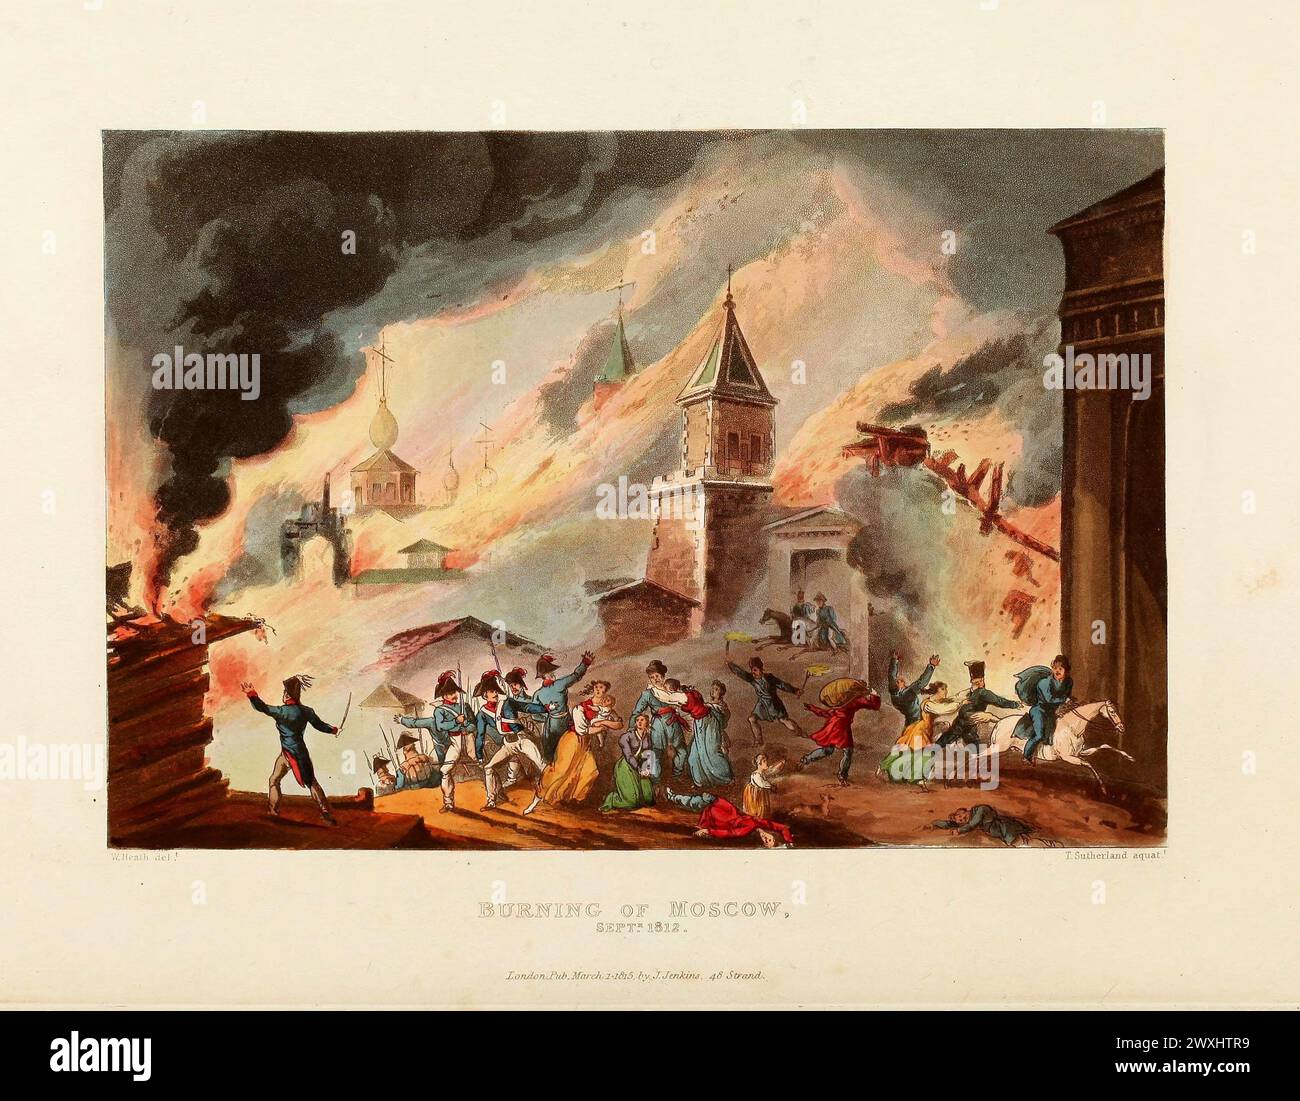 Burning of Moscow. Septmeber 1812. Vintage Coloured Aquatint, published by James Jenkins, 1815,  from  The martial achievements of Great Britain and her allies : from 1799 to 1815. Stock Photo